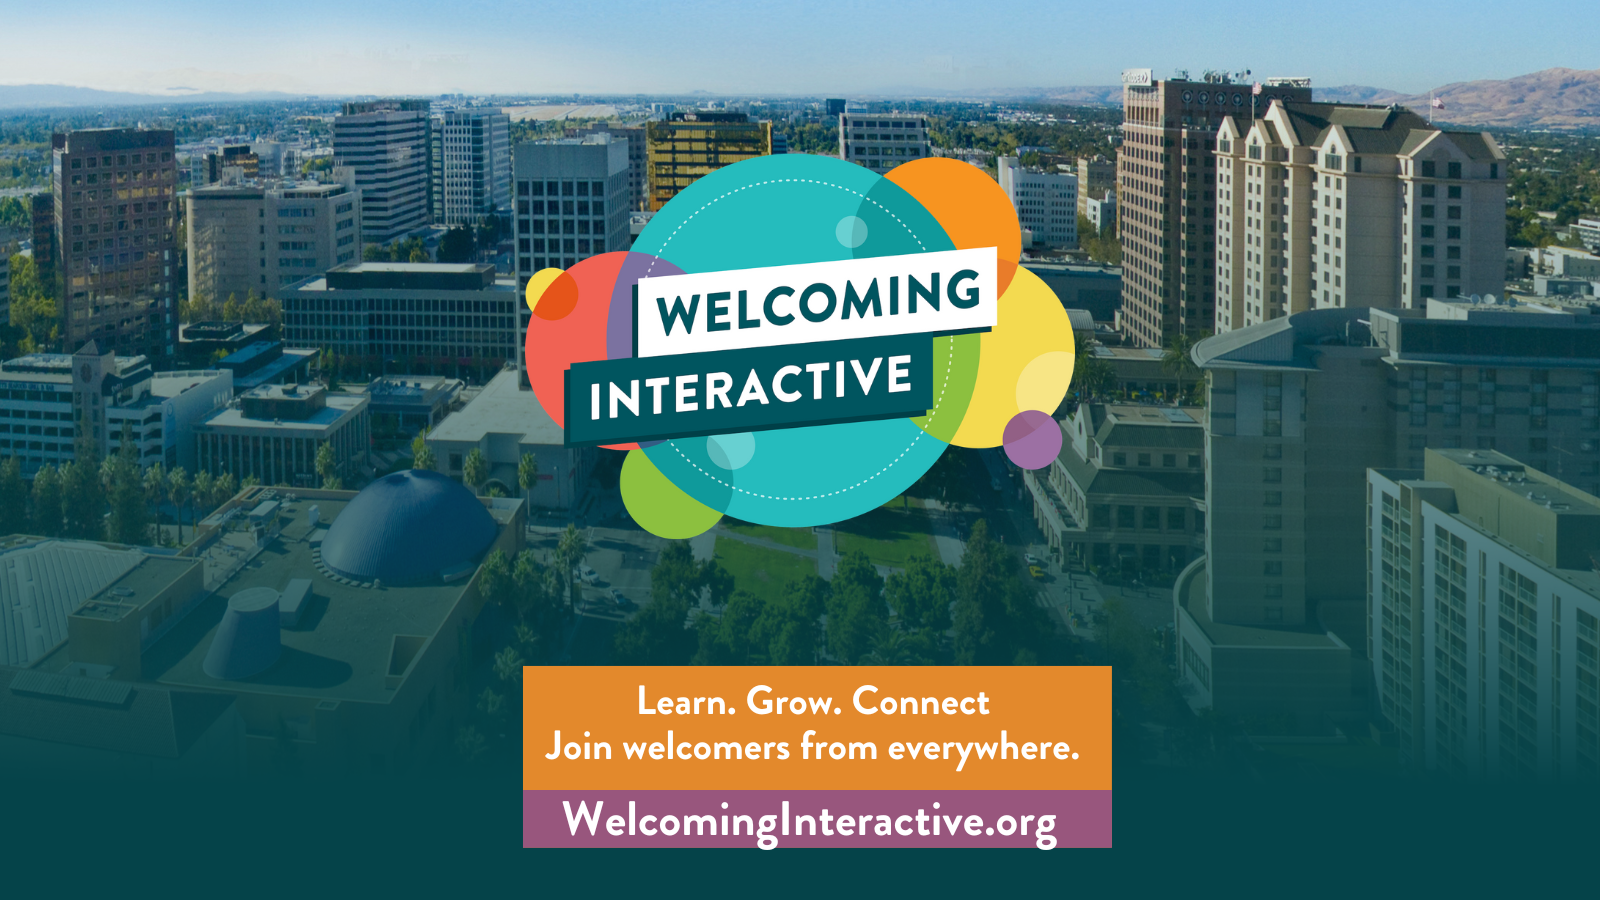 High angle image of San Jose, California skyline. Welcoming Interactive logo, mostly comprised of colorful circles and the words "Welcoming Interactive" is included in the graphic. Other words include: learn, grow, connect. Join welcomers from everywhere.